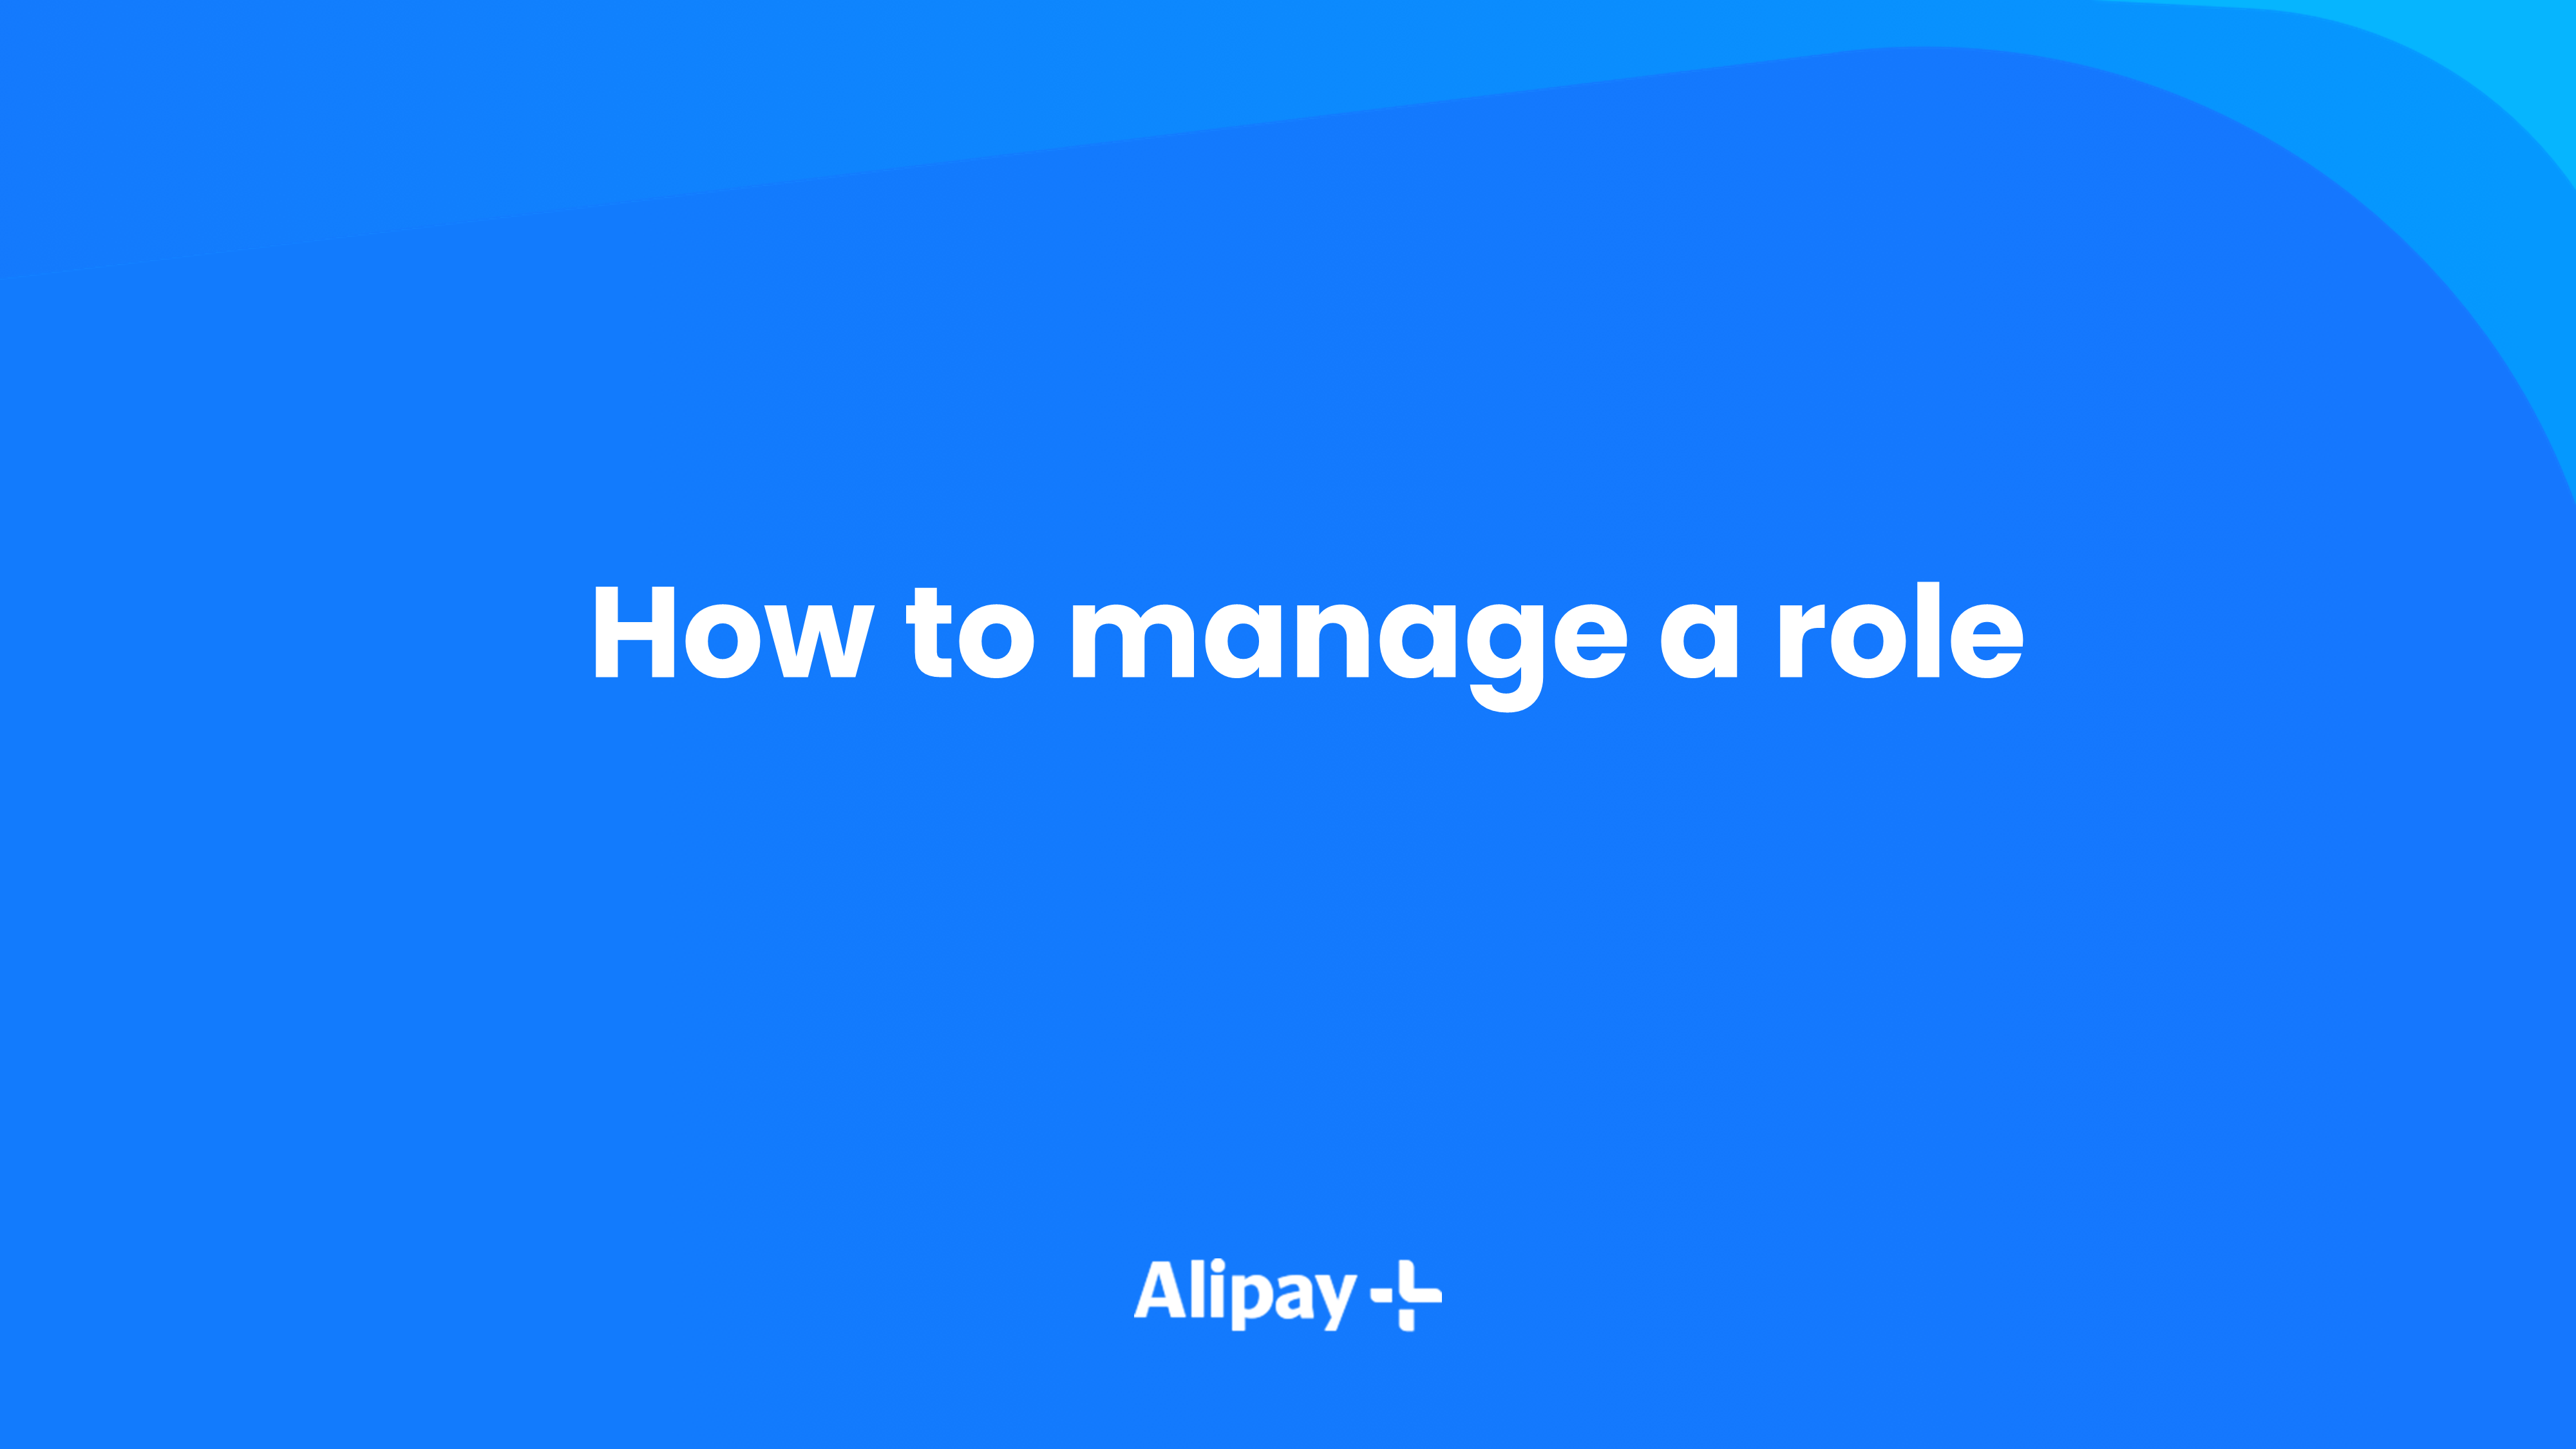 How to manage a role